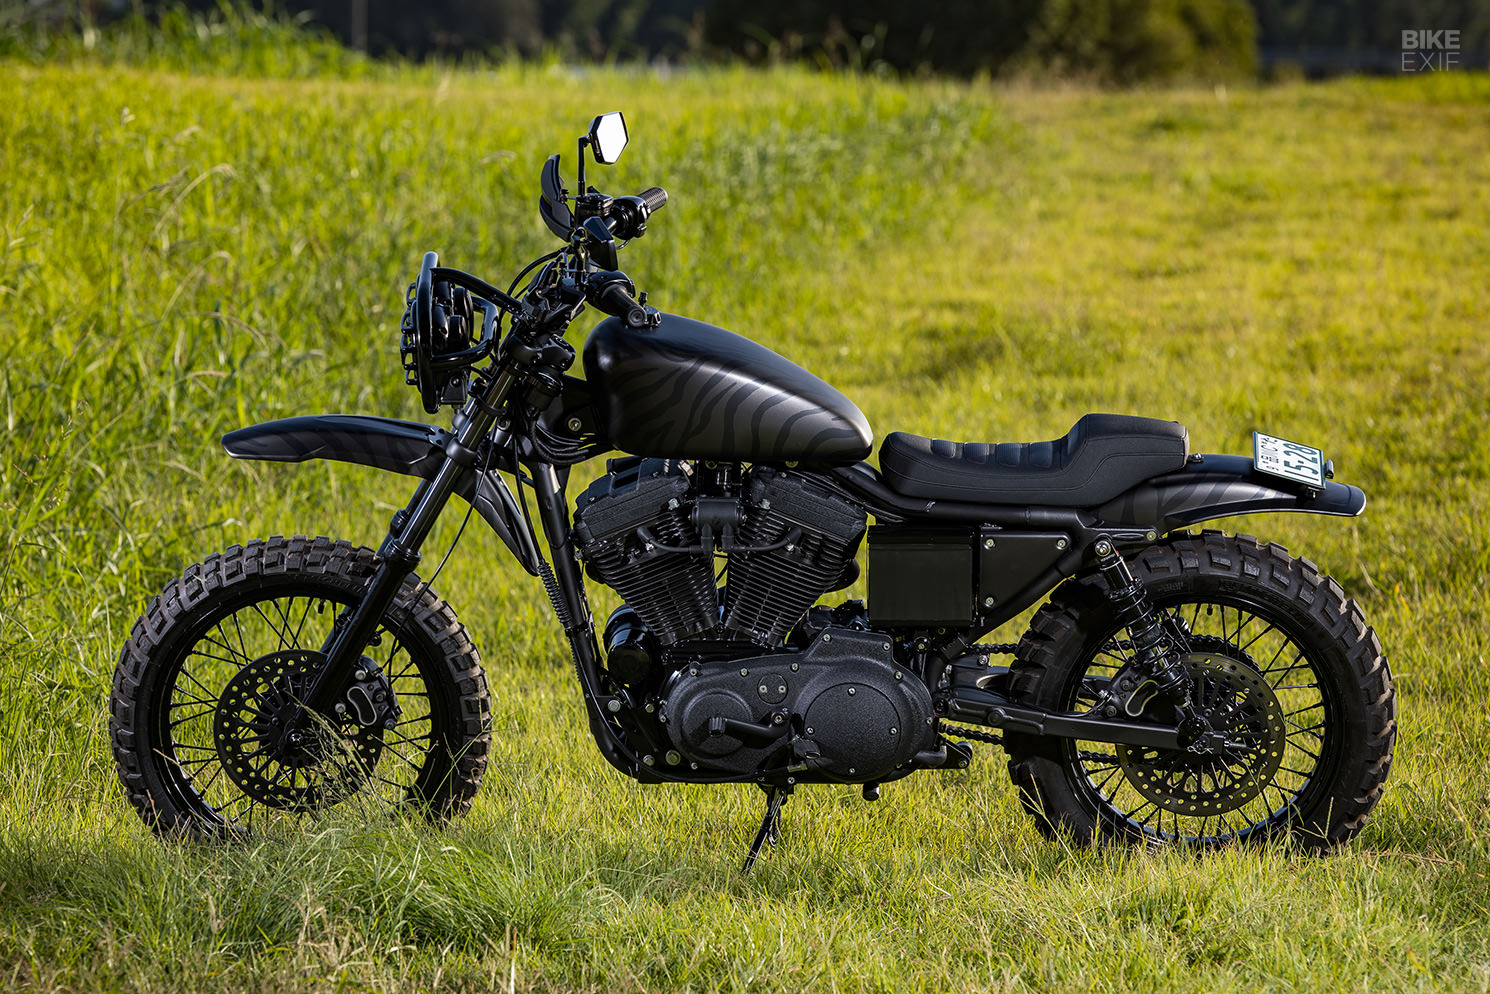 Brutester: An animalistic Harley Sportster 883 scrambler from Japan